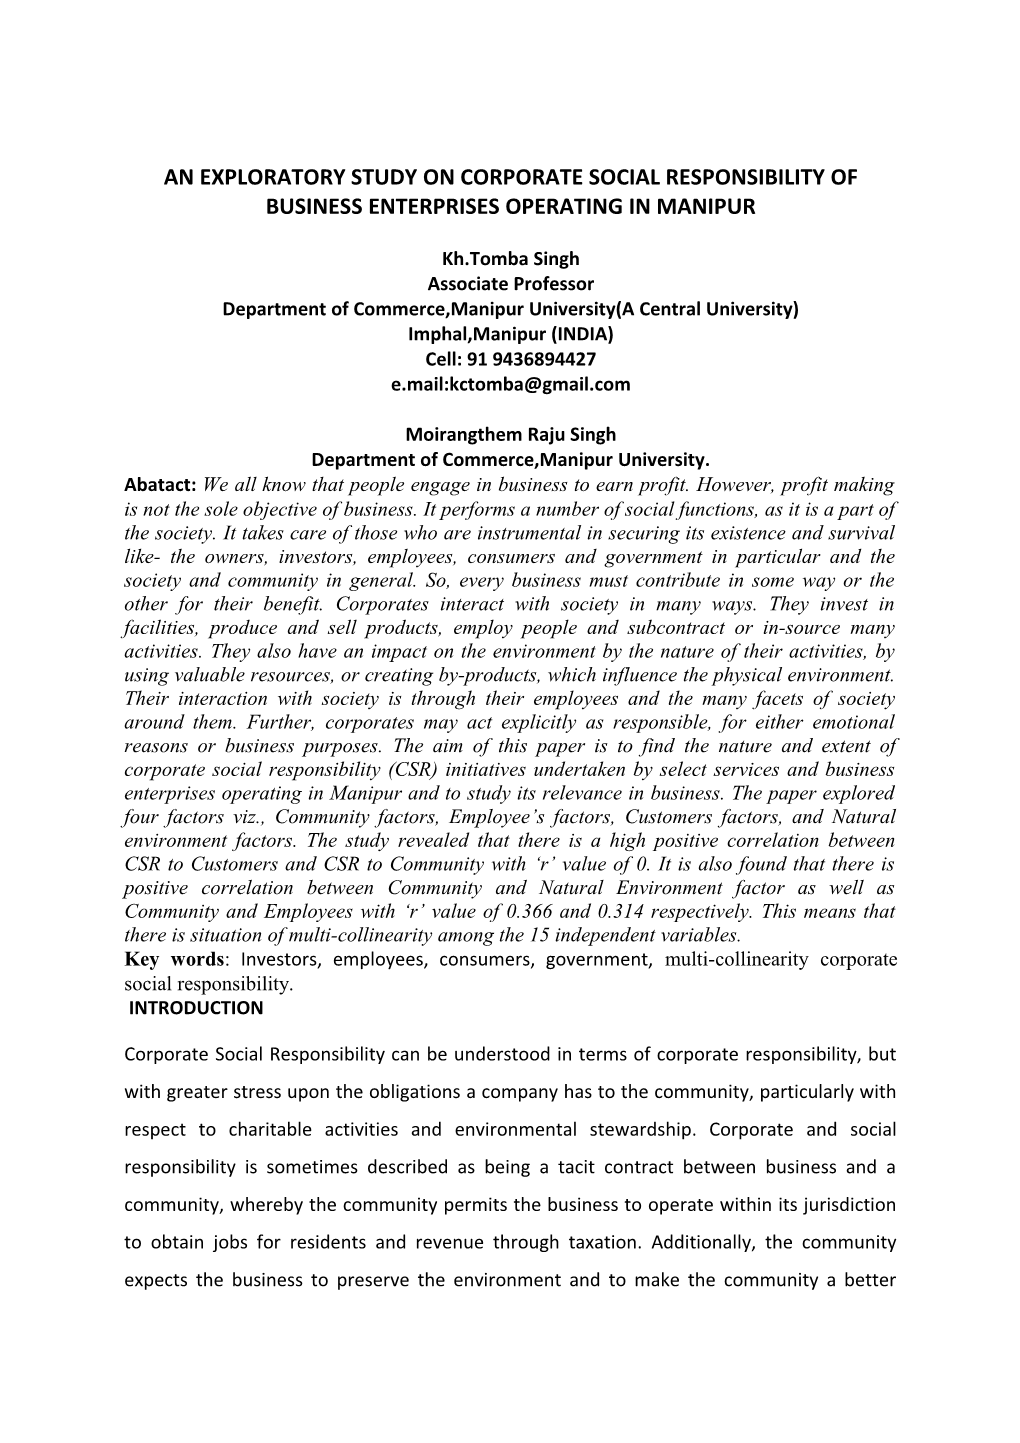 An Exploratory Study on Corporate Social Responsibility of Business Enterprises Operating